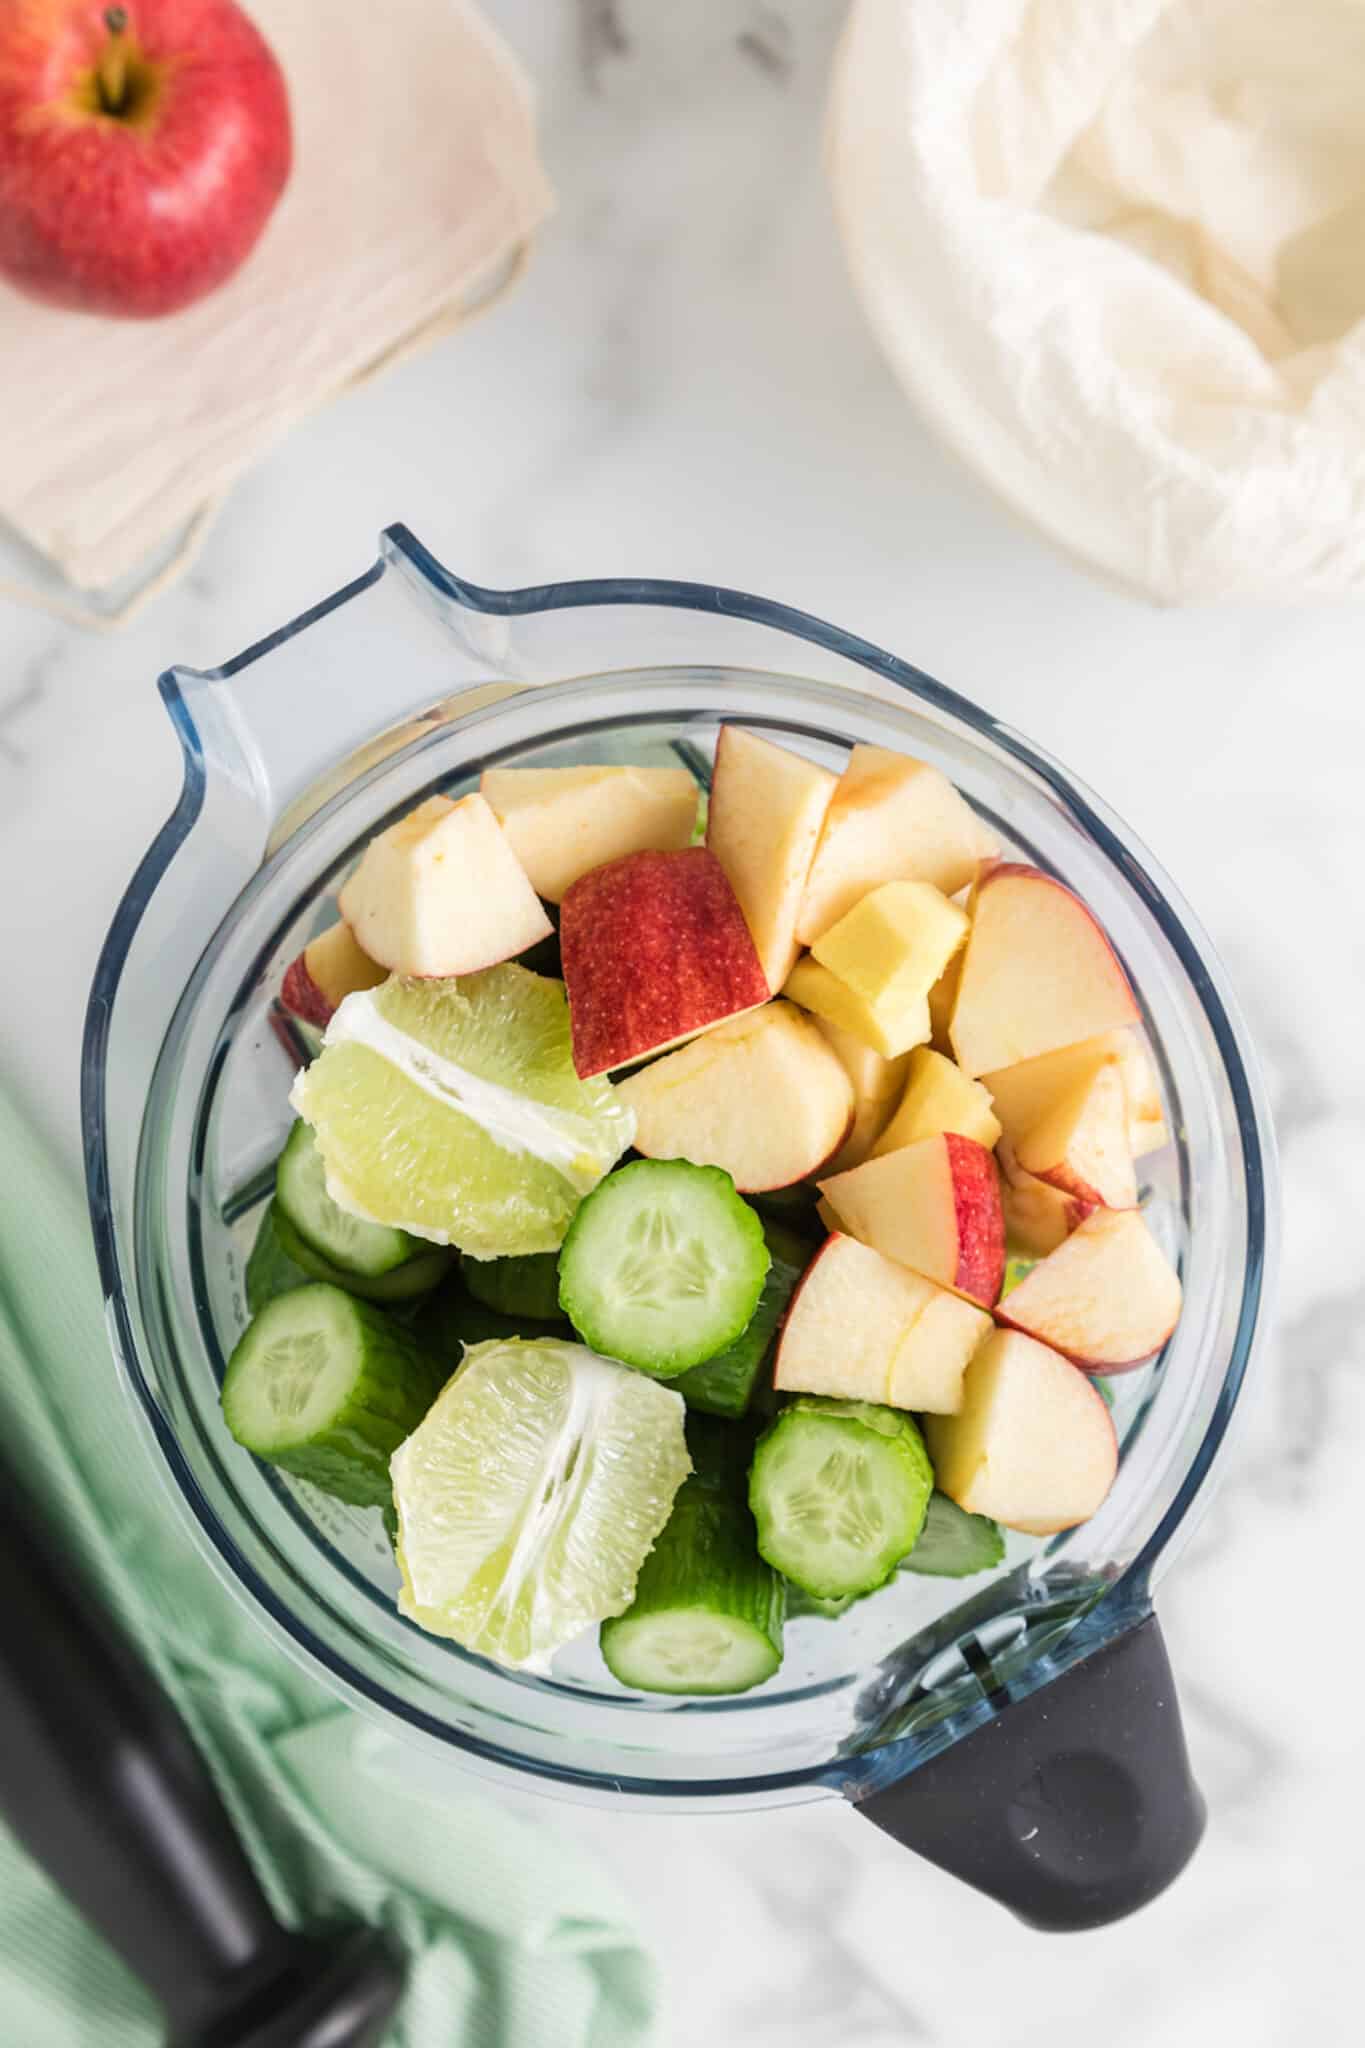 Diced apples, cucumbers, and limes in the jar of a blender.